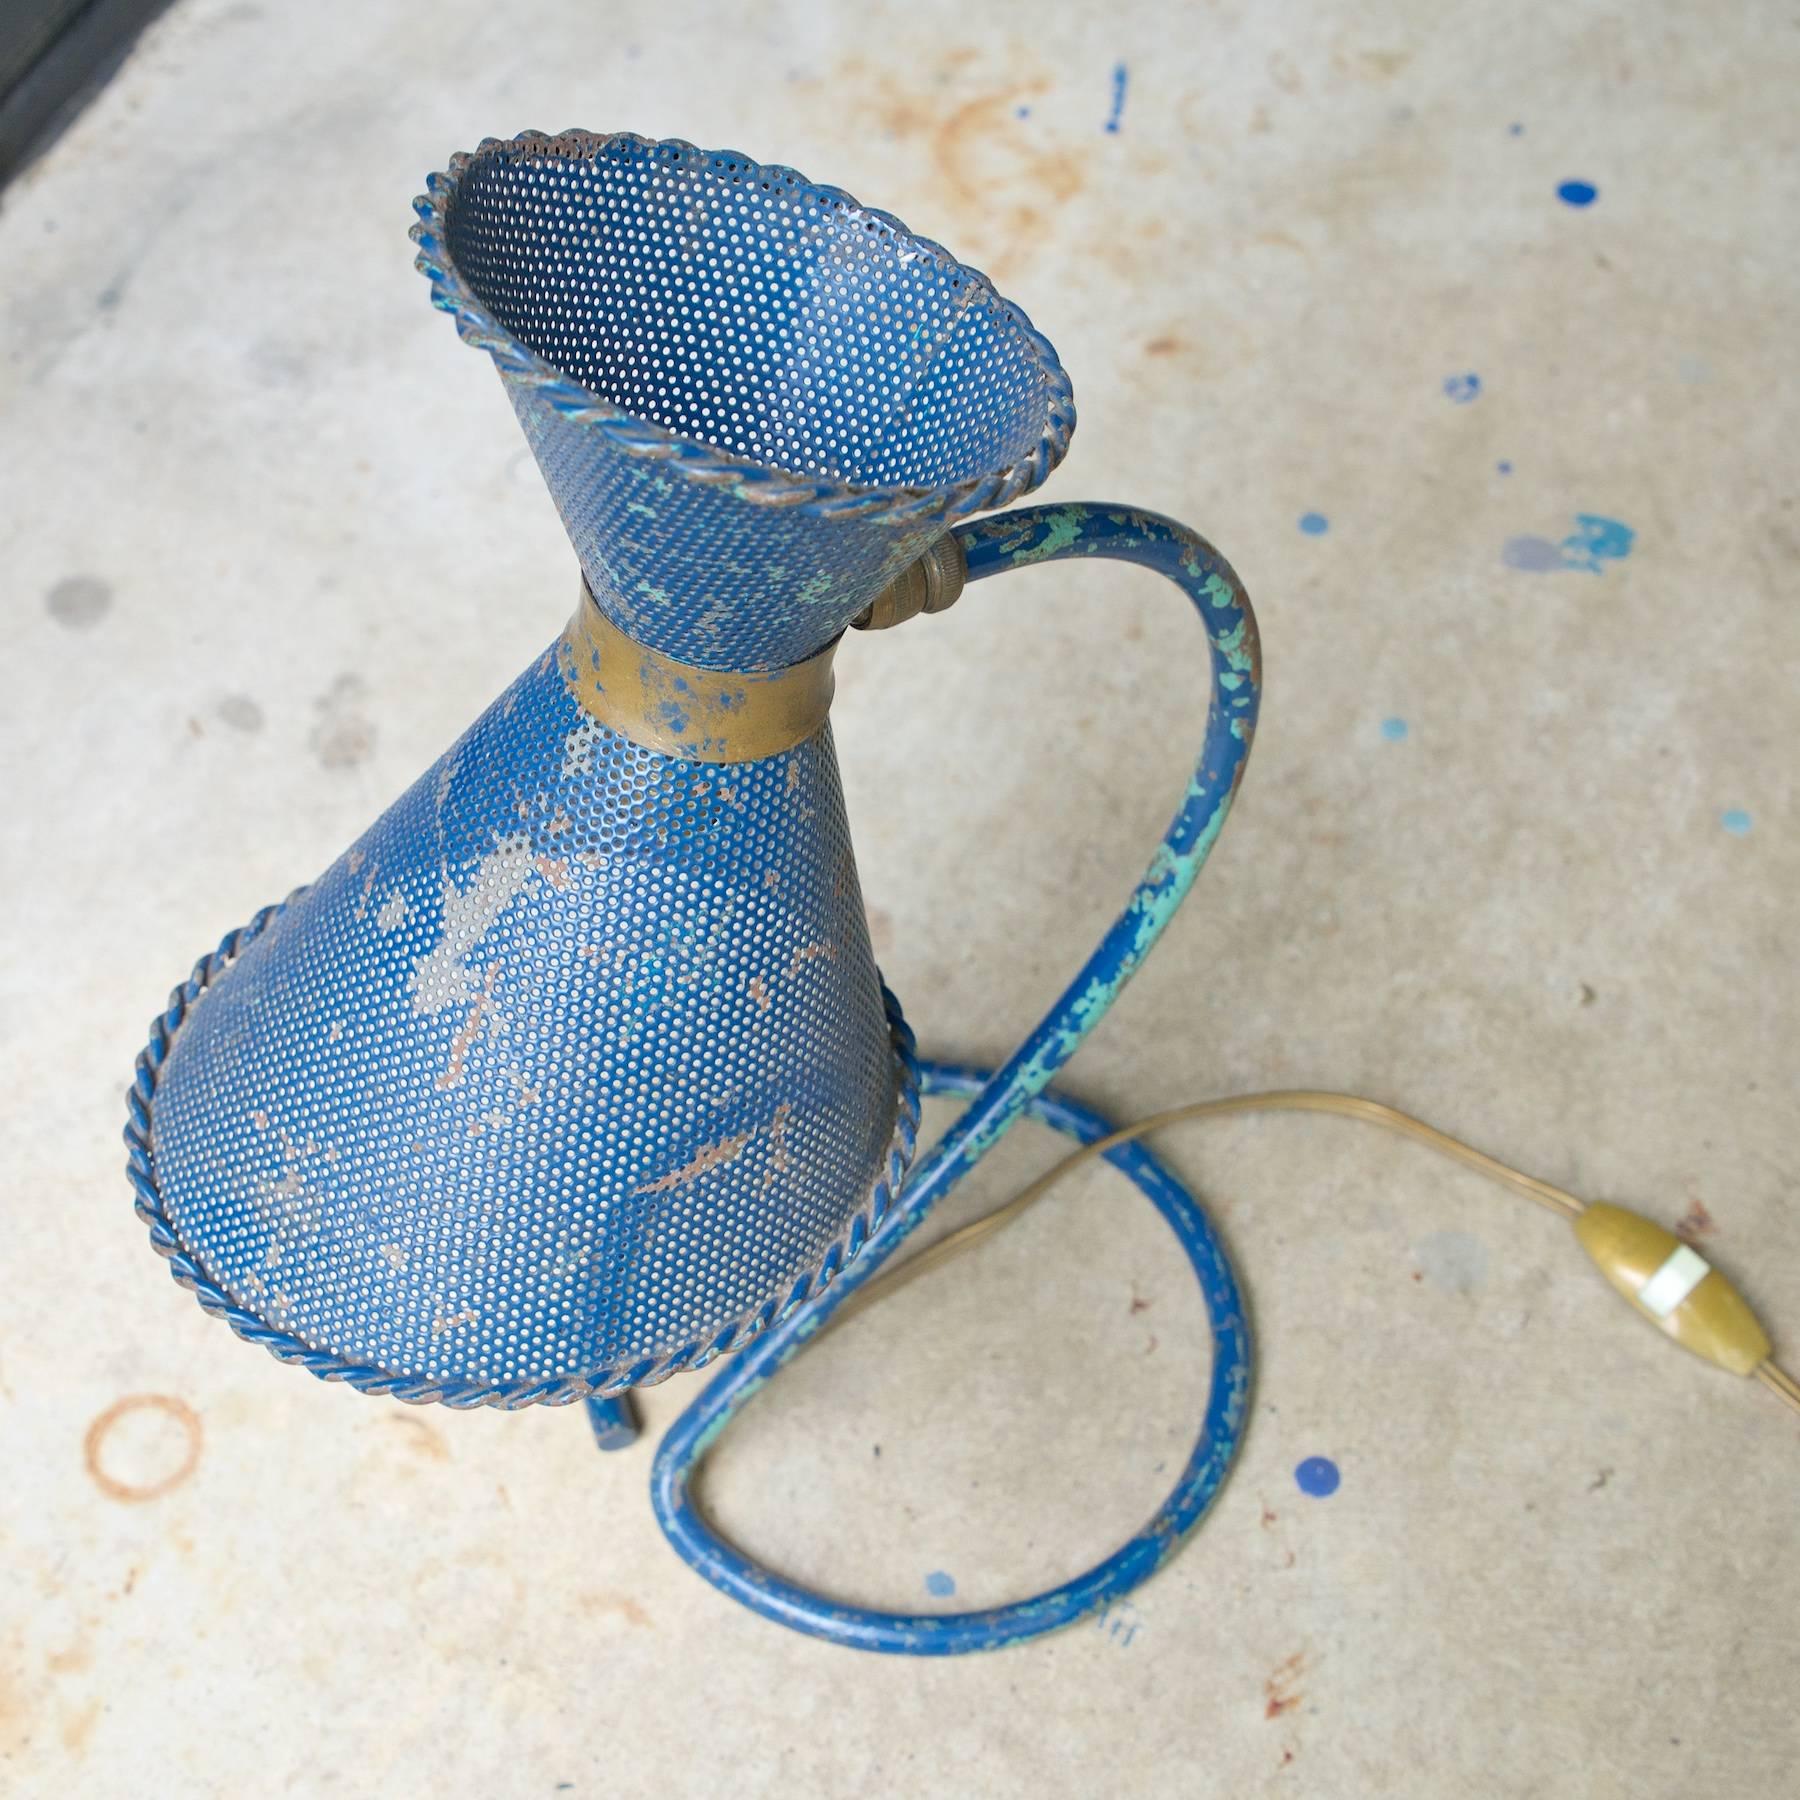 French table light by Mathieu Mategot (1910-2001), produced by Atelier Mategot in the 1950s. Adjustable Head with blue and grey varnishes on perforated diabolo metal double cone shade. 

Original Finish with original European cord and socket.  Could